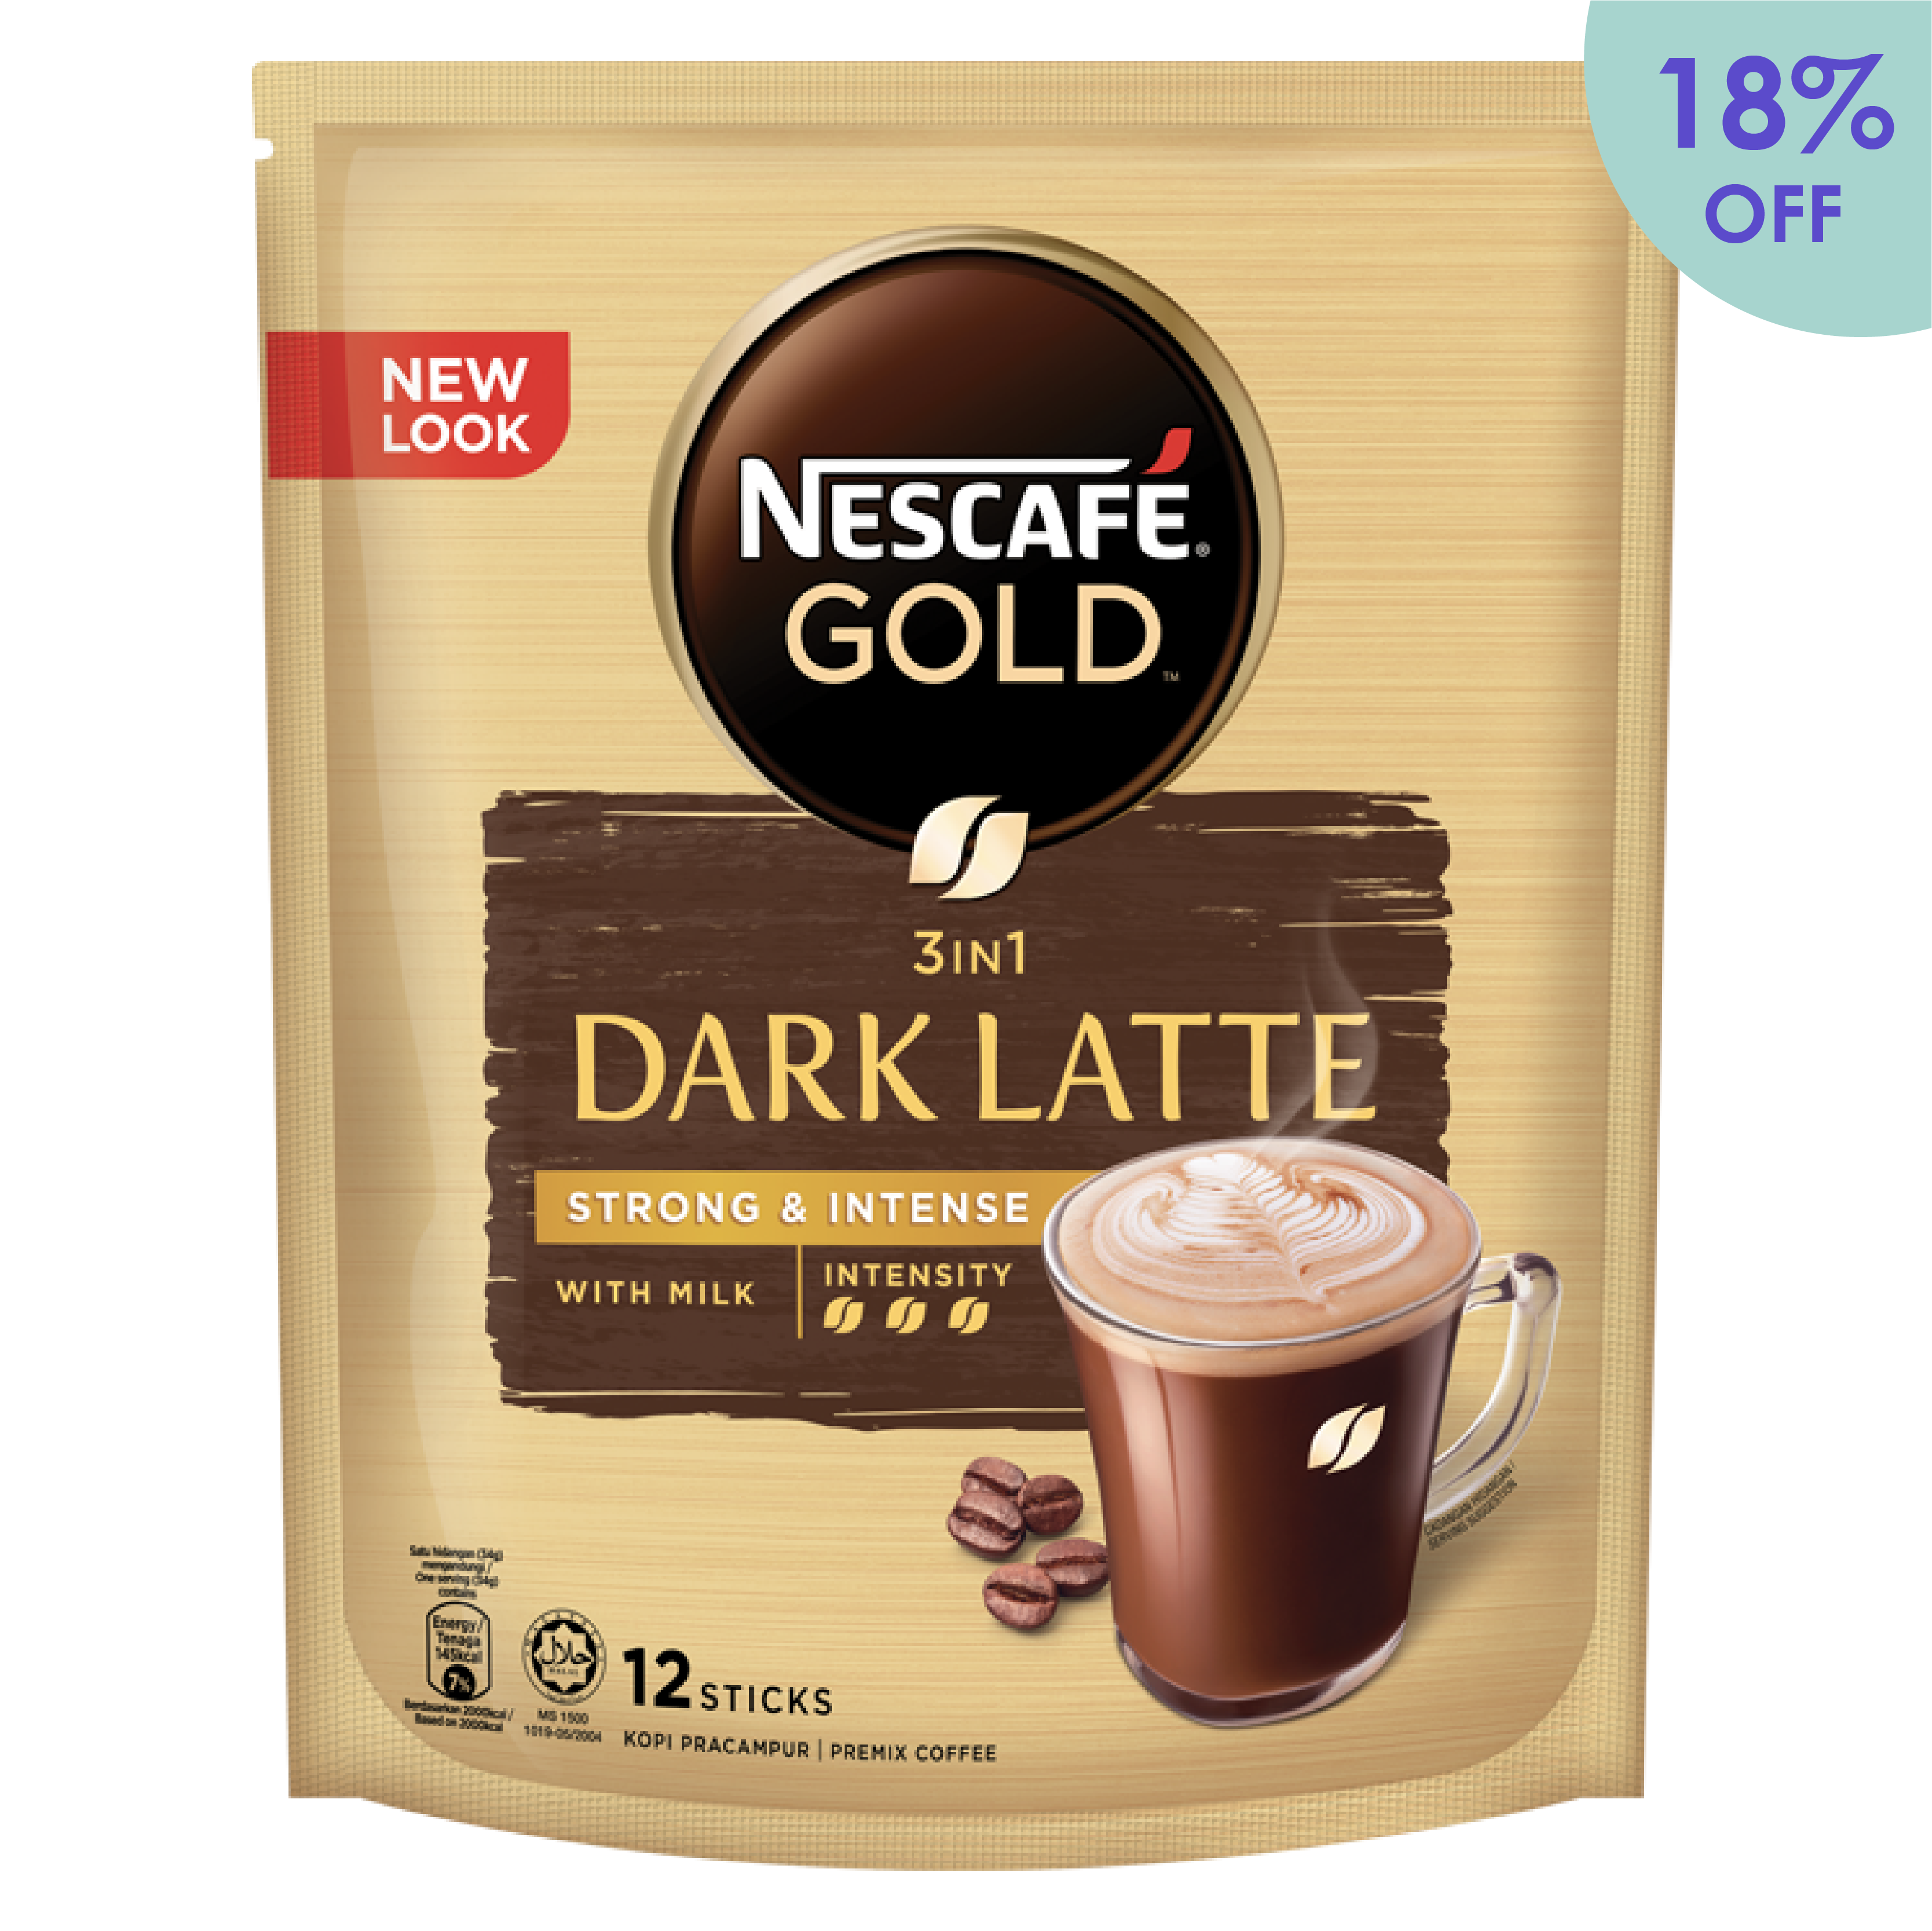 https://excite-web-images.storage.googleapis.com/wp-content/uploads/2022/08/NESCAFE-Gold-3IN1-12s.png